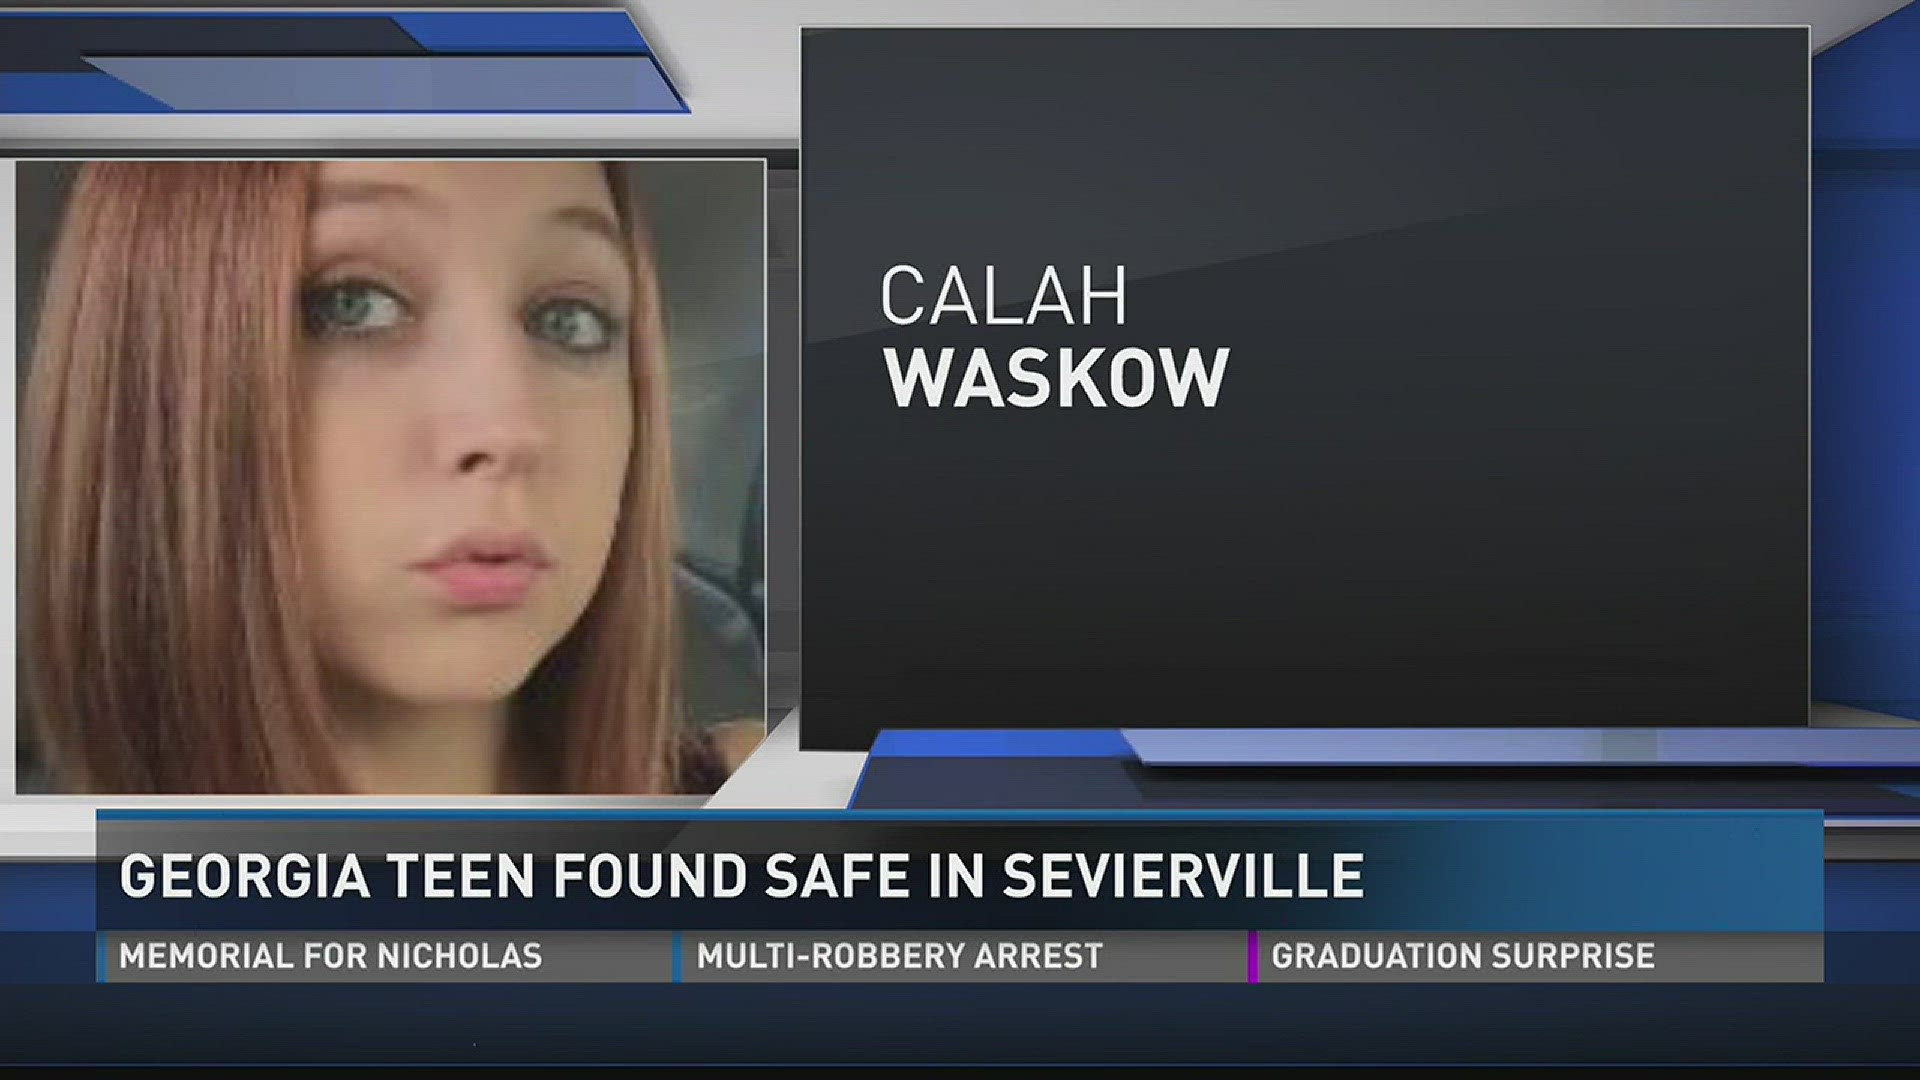 Our sister station in Augusta, Georgia reports that Calah Waskow, 15, and Jason Johnson, 37, were found together in Sevierville on Saturday.